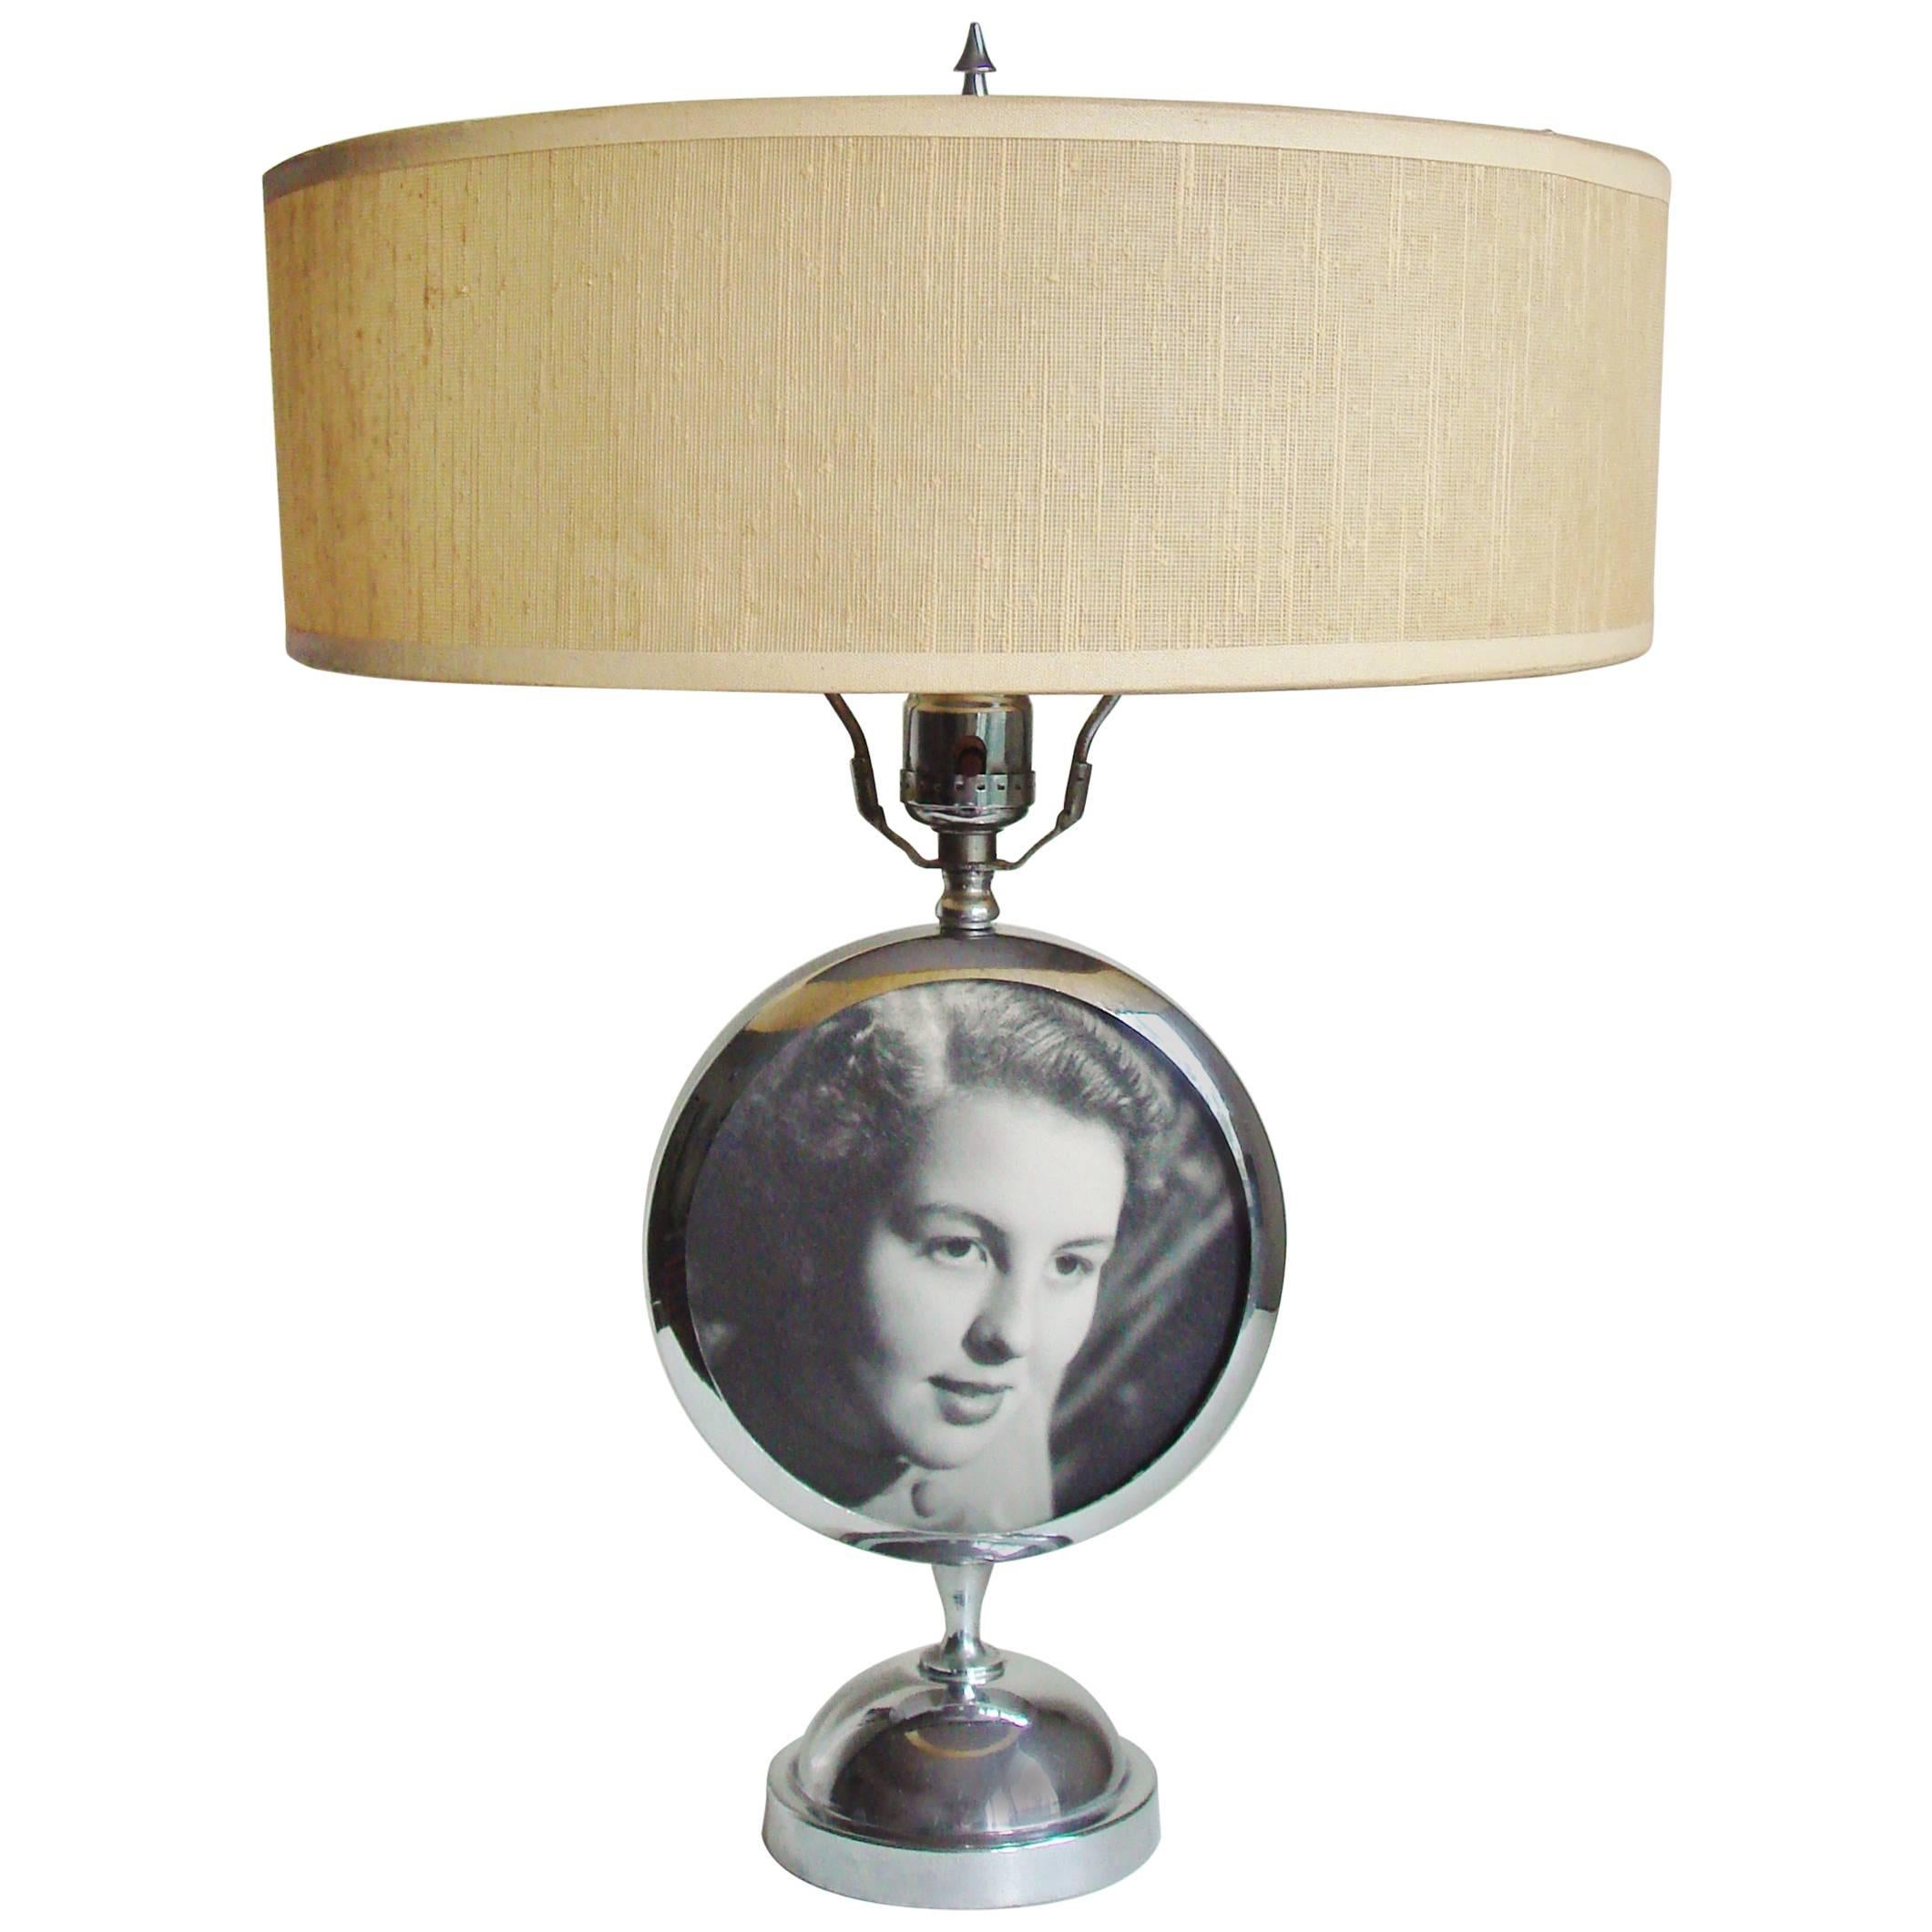 American Art Deco Chrome Table Lamp with Integral Photo Frame by Rubal Lighting. For Sale